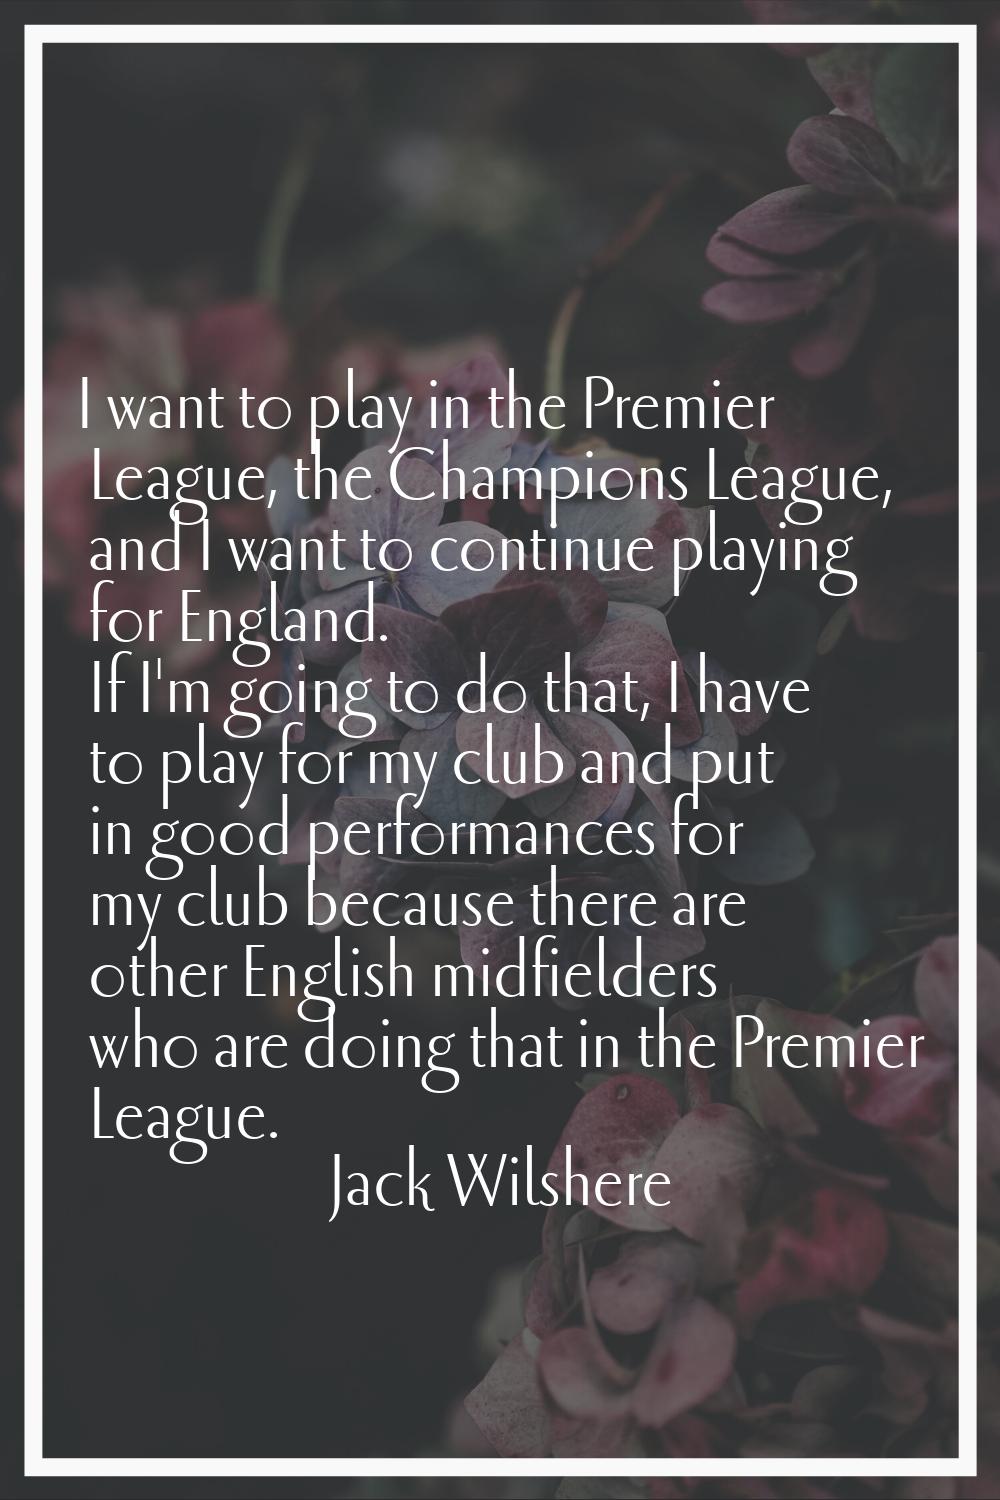 I want to play in the Premier League, the Champions League, and I want to continue playing for Engl